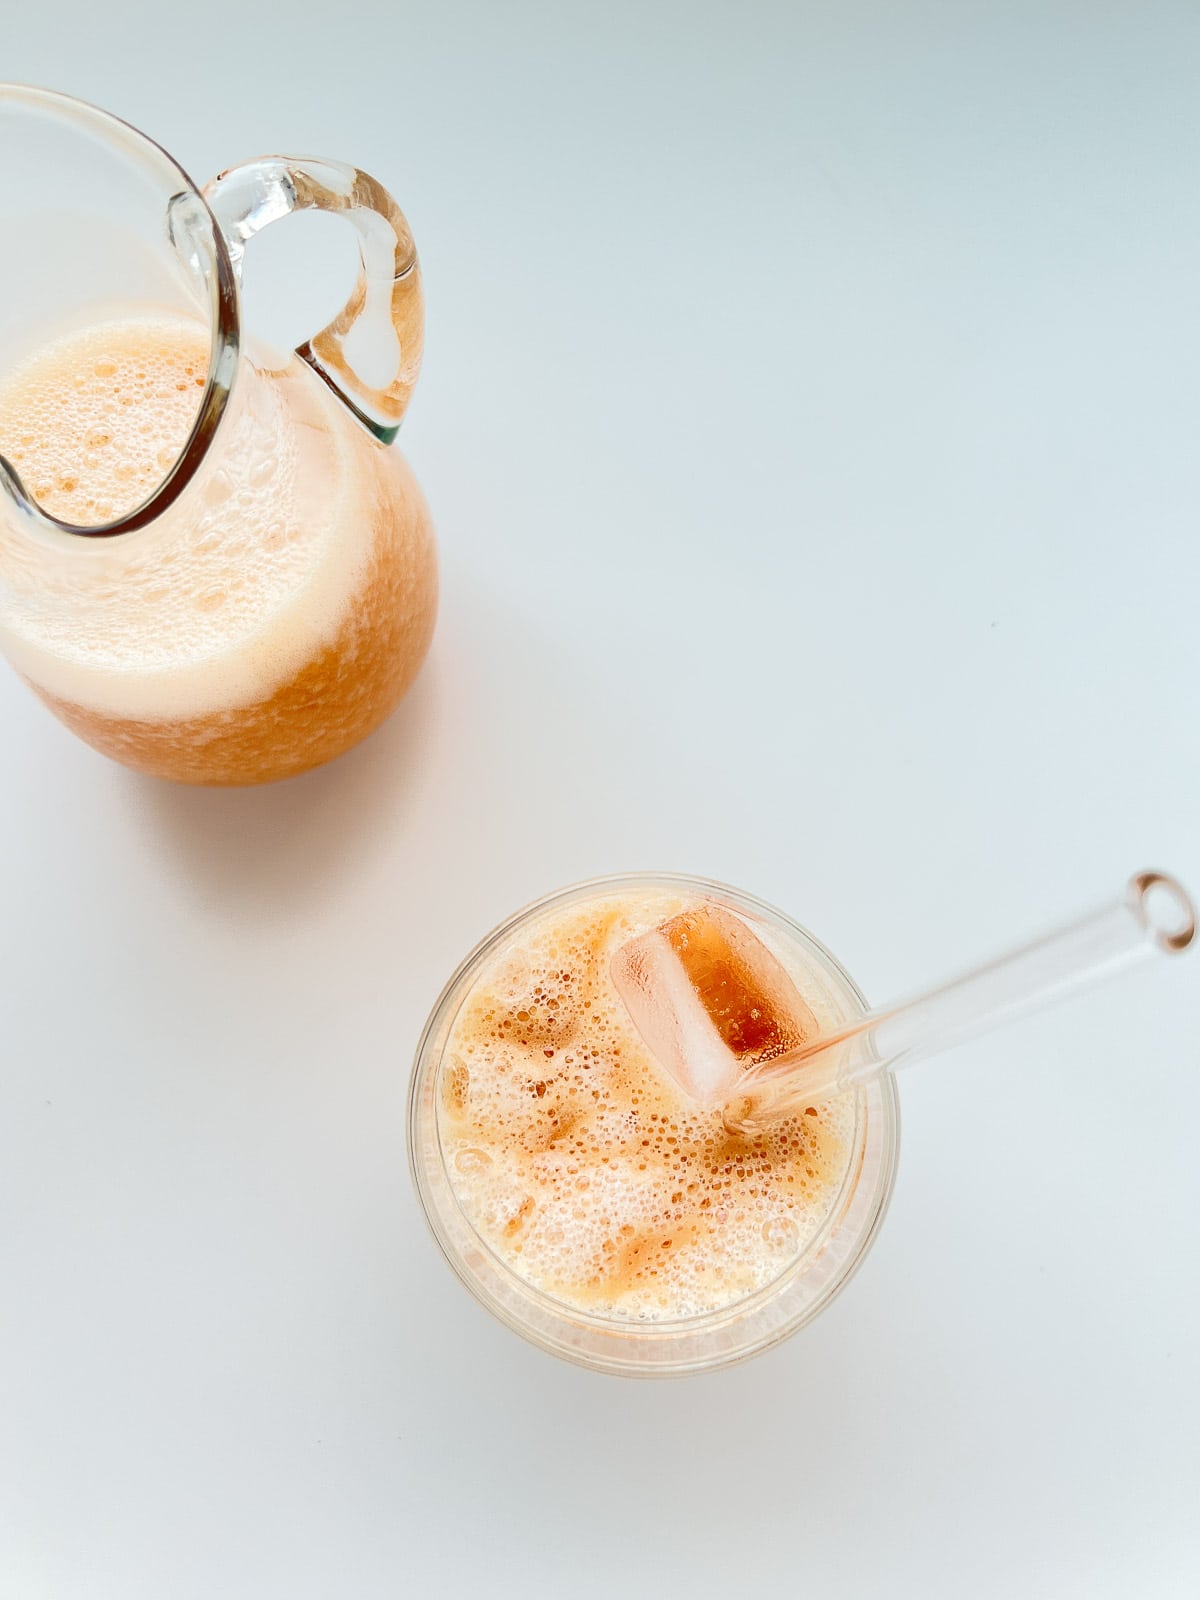 An image of a fruit frappe in a glass with a pitcher full of the same nearby.